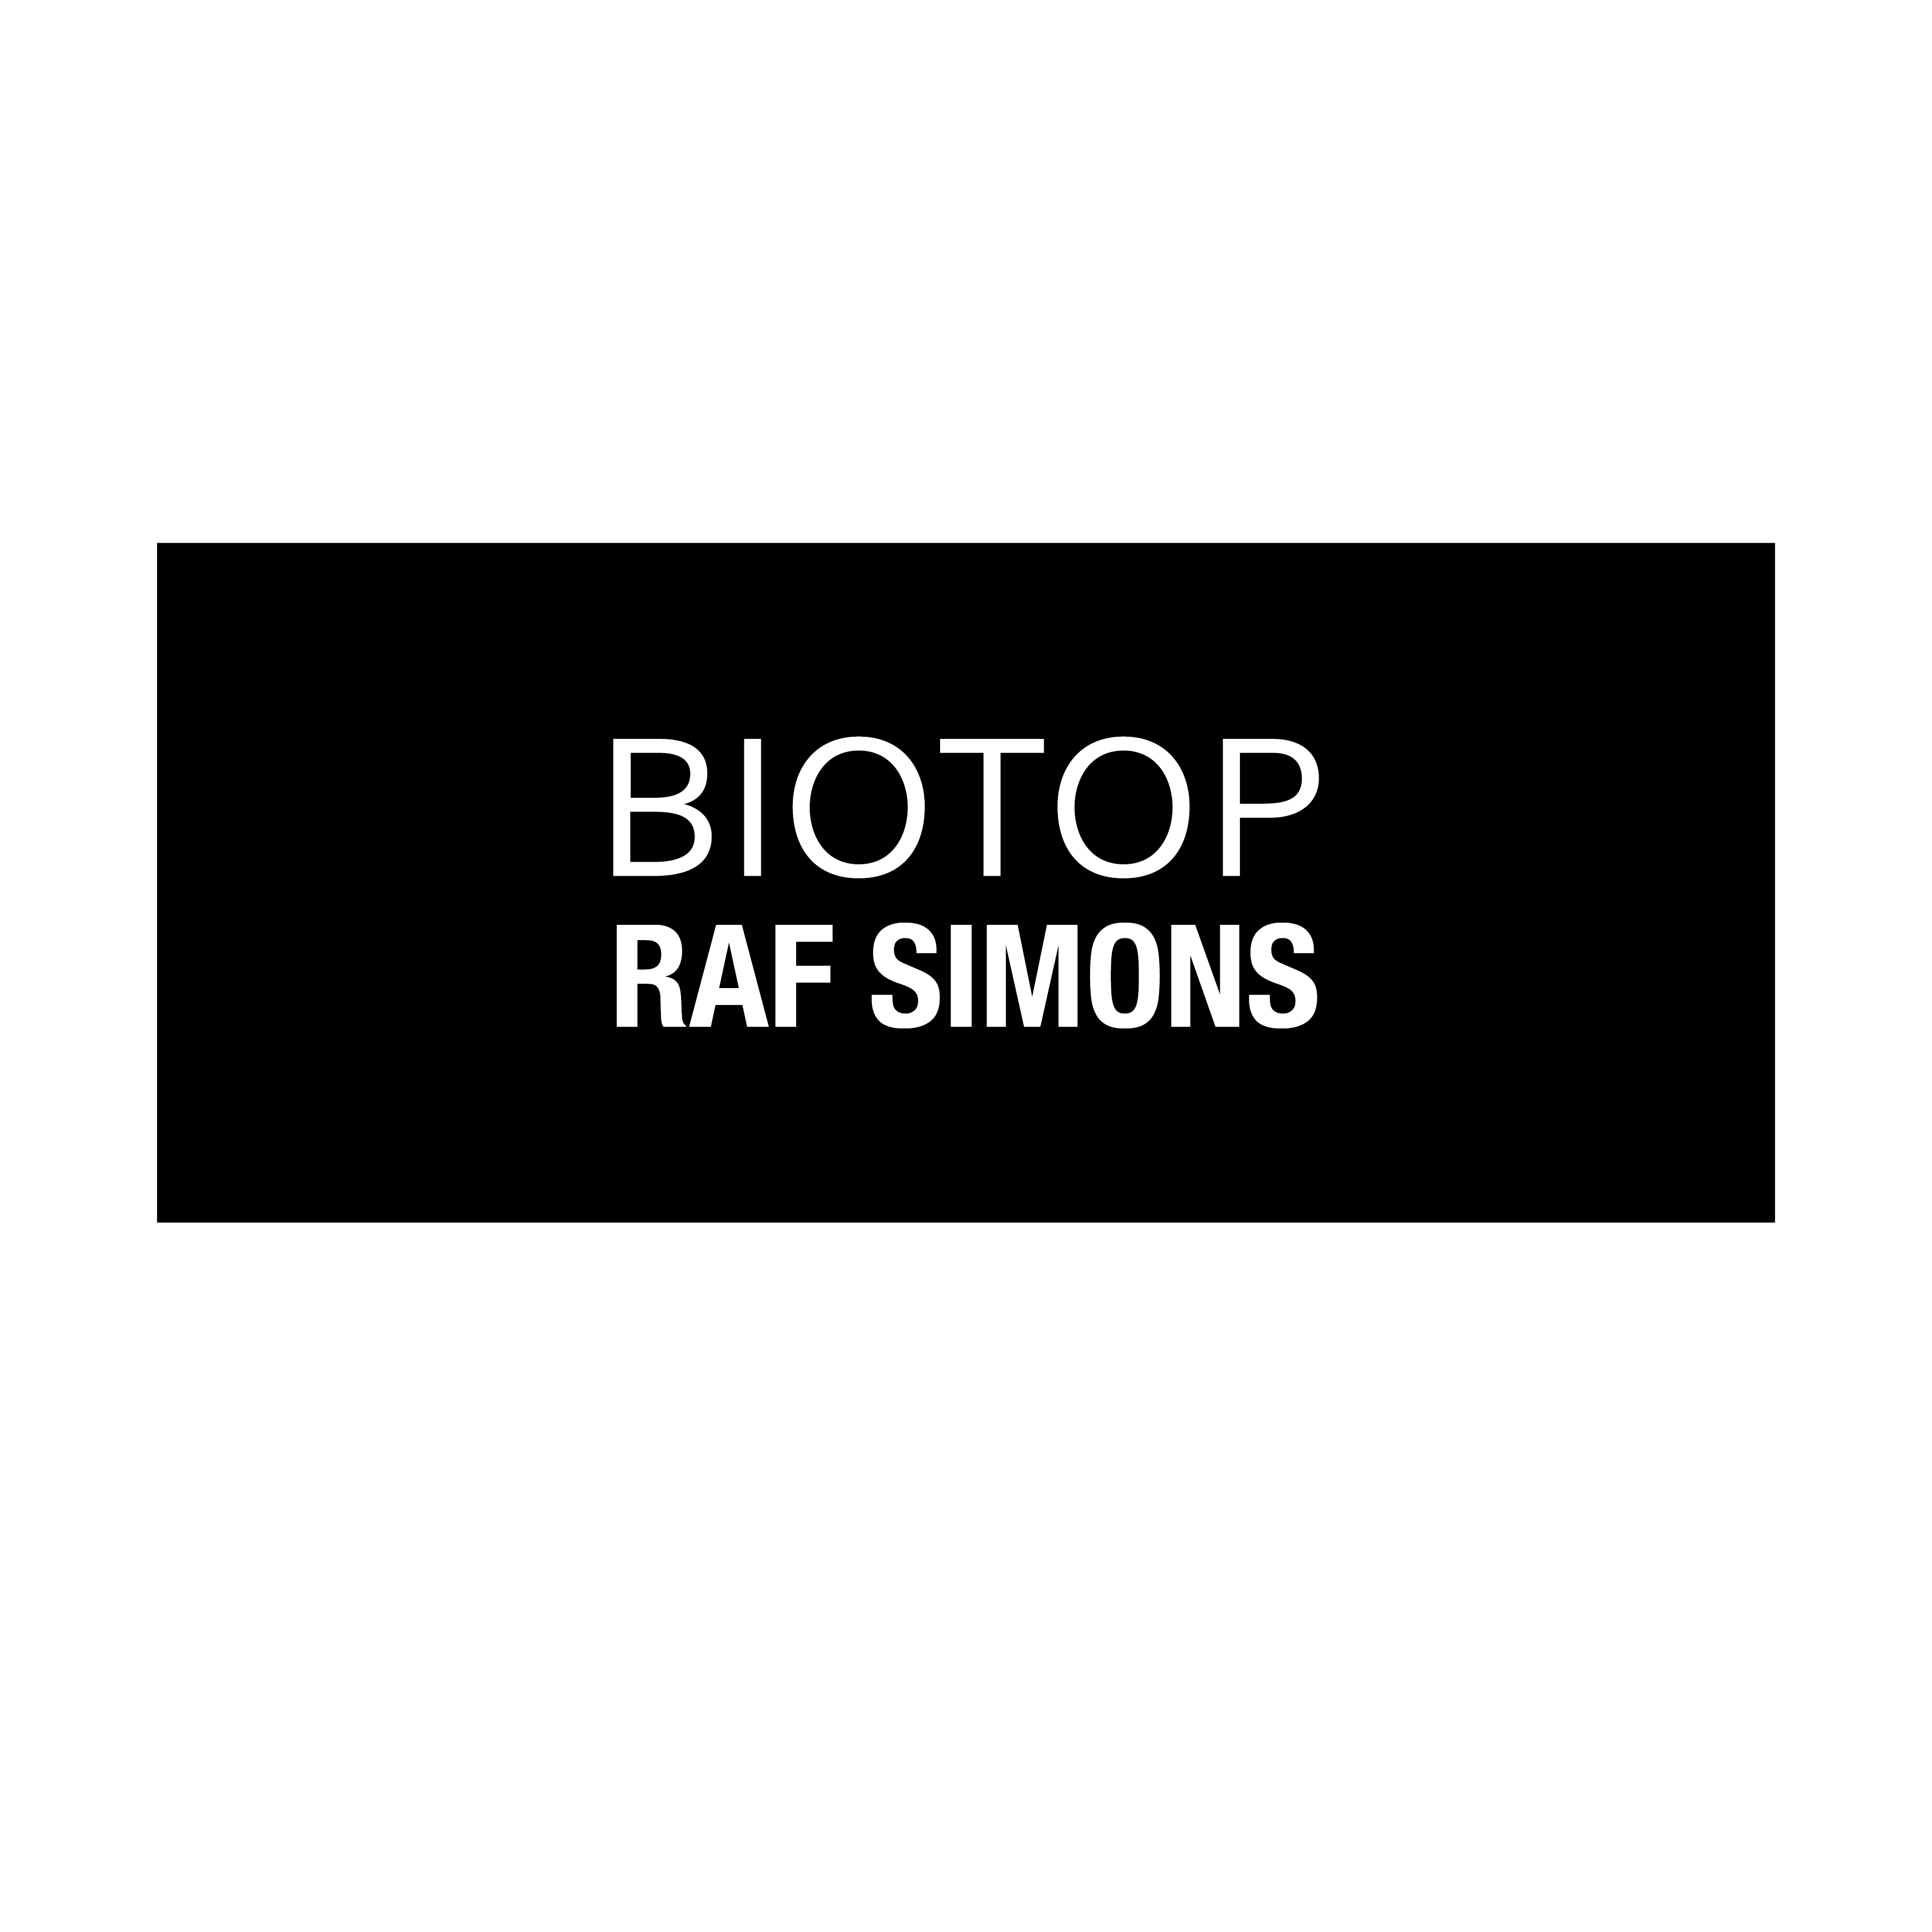 RAF SIMONS EXCLUSIVE BLANKET FOR BIOTOP